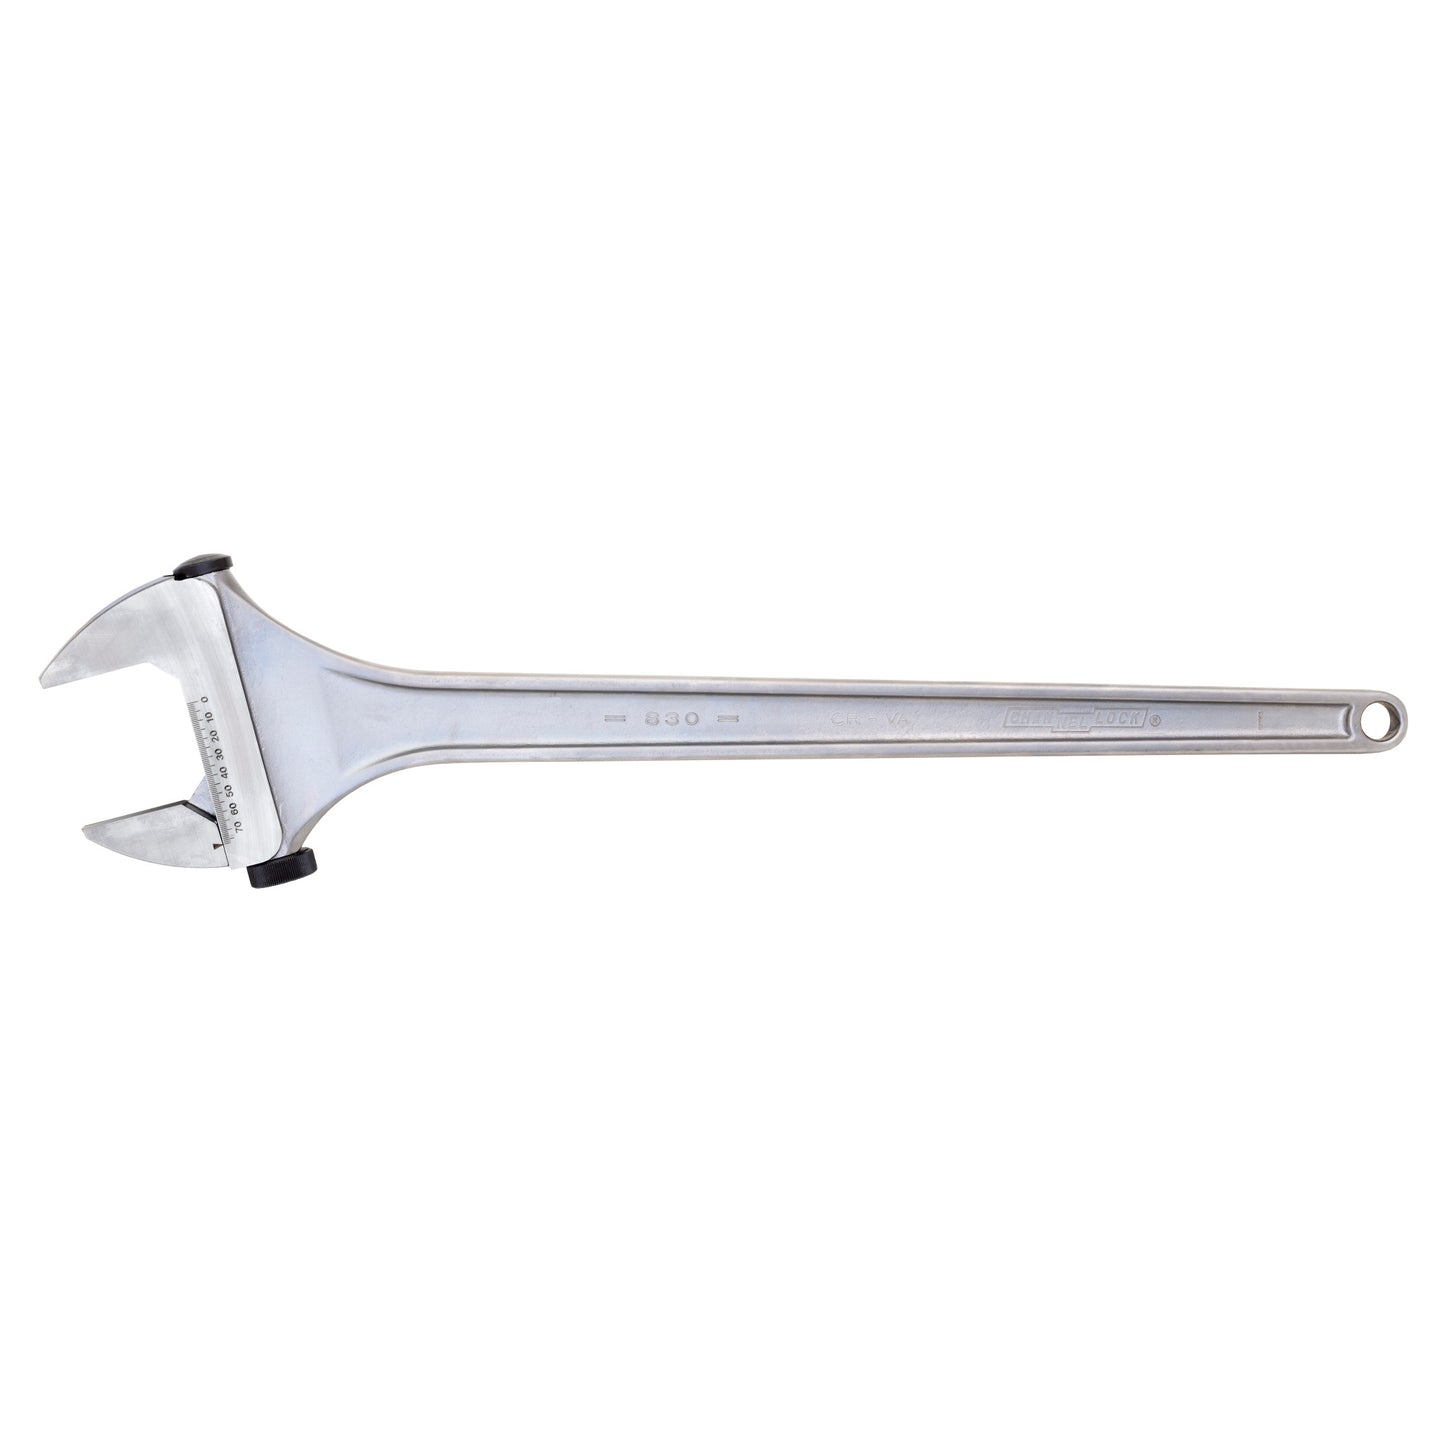 30-inch Adjustable Wrench (830)